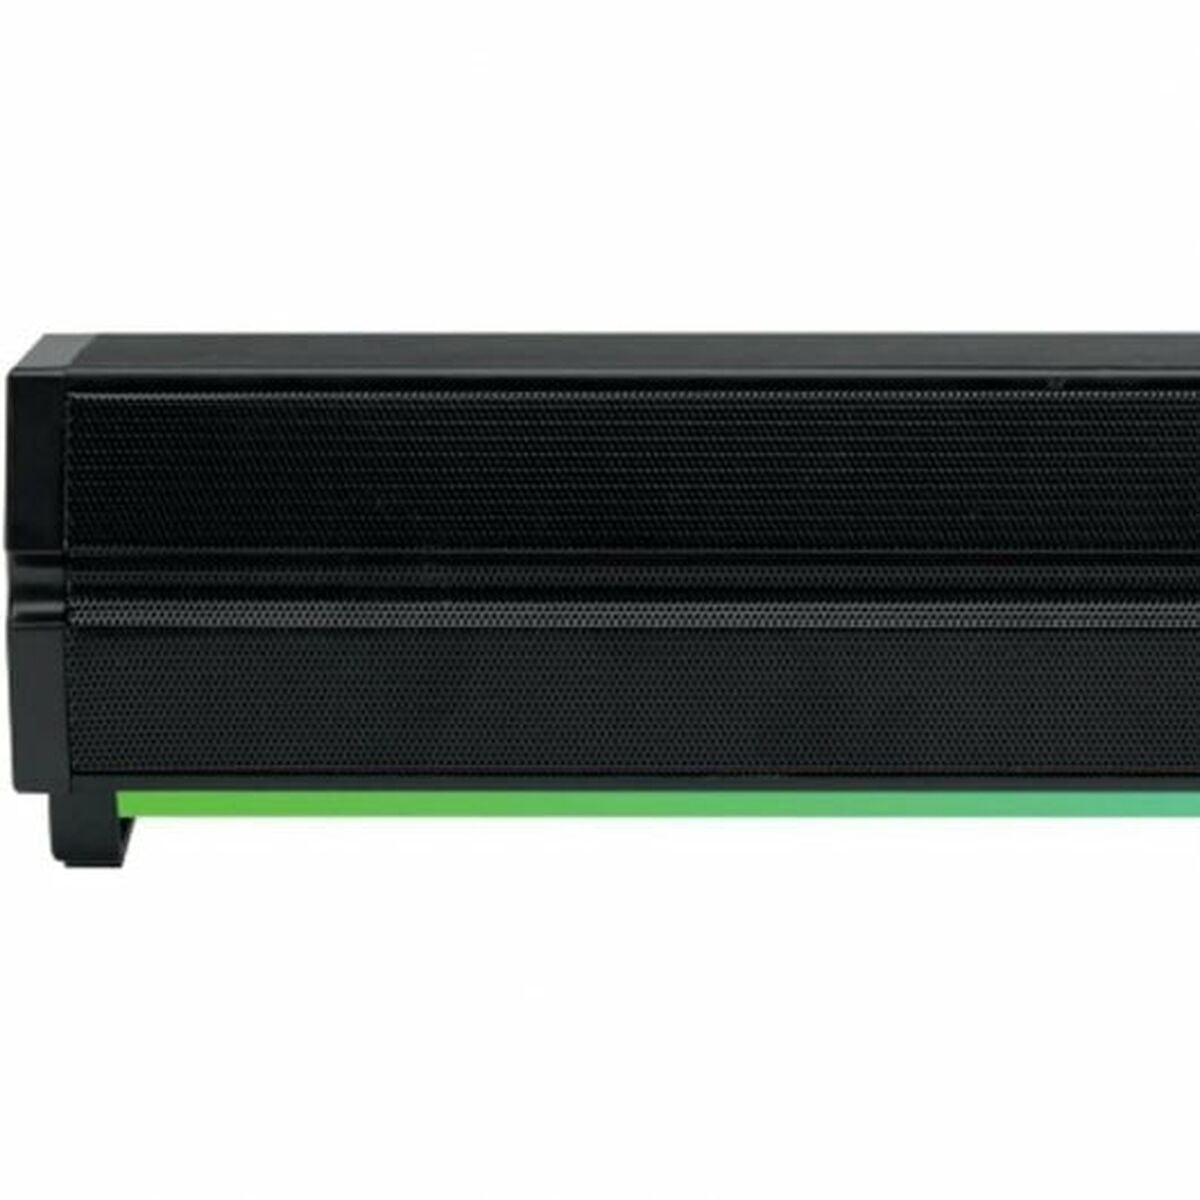 Wireless Sound Bar Woxter SO26-103 Black, Woxter, Electronics, Audio and Hi-Fi equipment, wireless-sound-bar-woxter-so26-103-black, Brand_Woxter, category-reference-2609, category-reference-2882, category-reference-2925, category-reference-t-19653, category-reference-t-7441, category-reference-t-7442, category-reference-t-7448, cinema and television, Condition_NEW, entertainment, music, Price_20 - 50, Teleworking, RiotNook